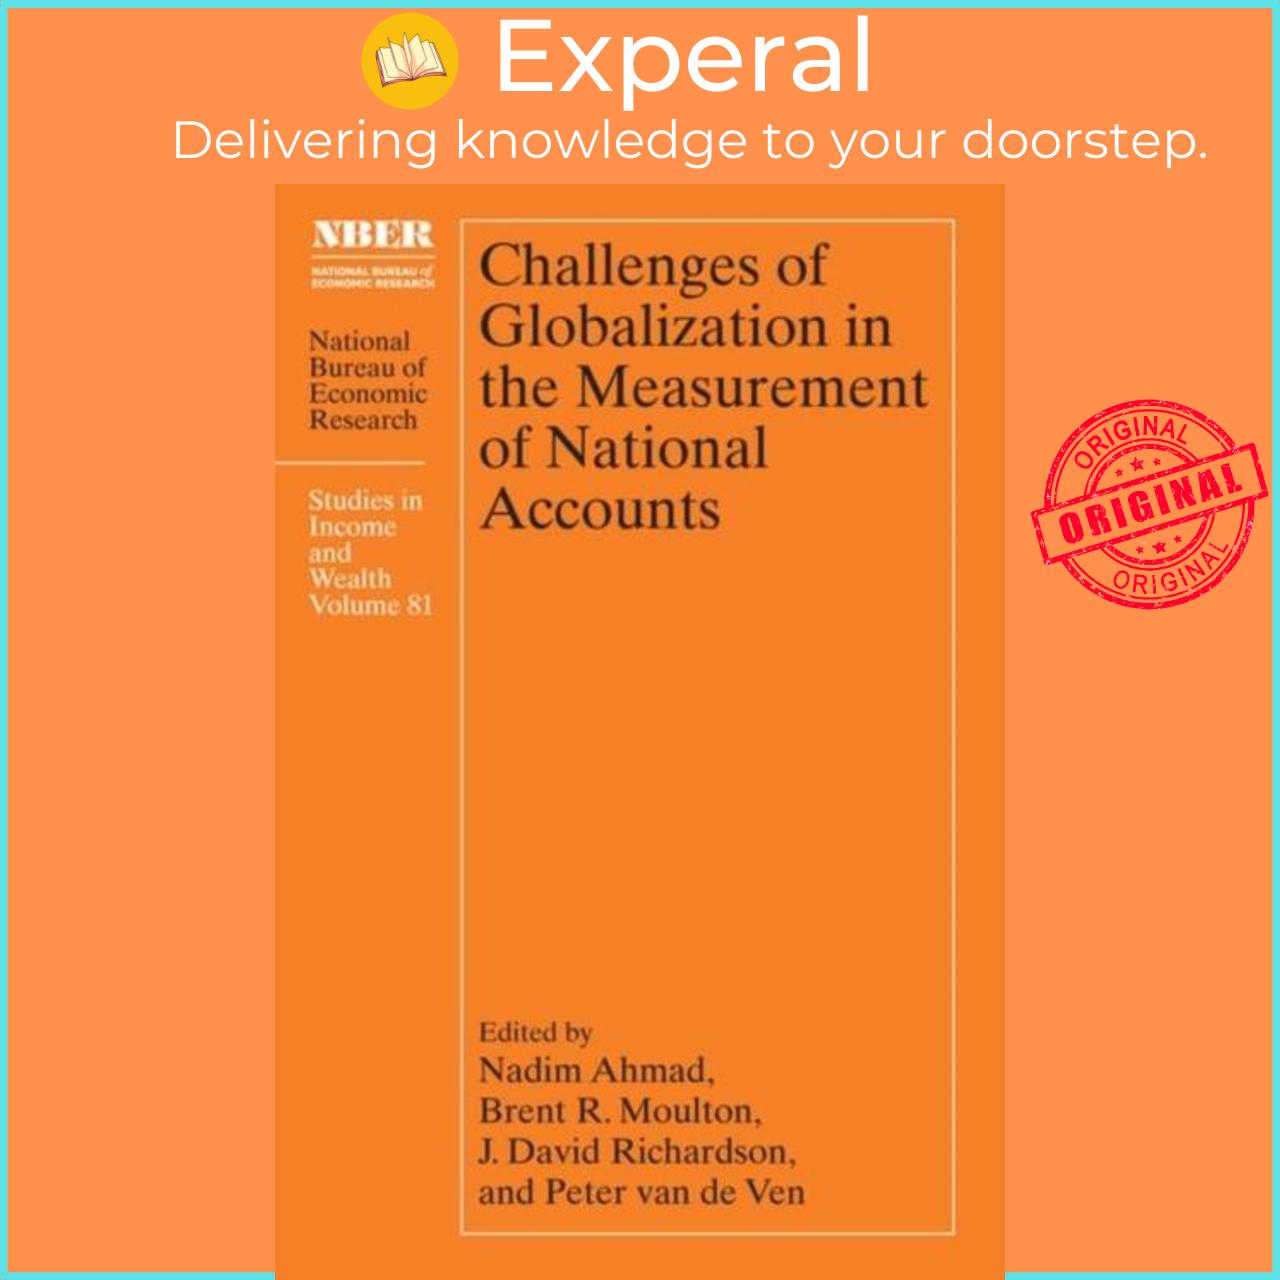 Sách - Challenges of Globalization in the Measurement of National Account by J. David Richardson (UK edition, hardcover)